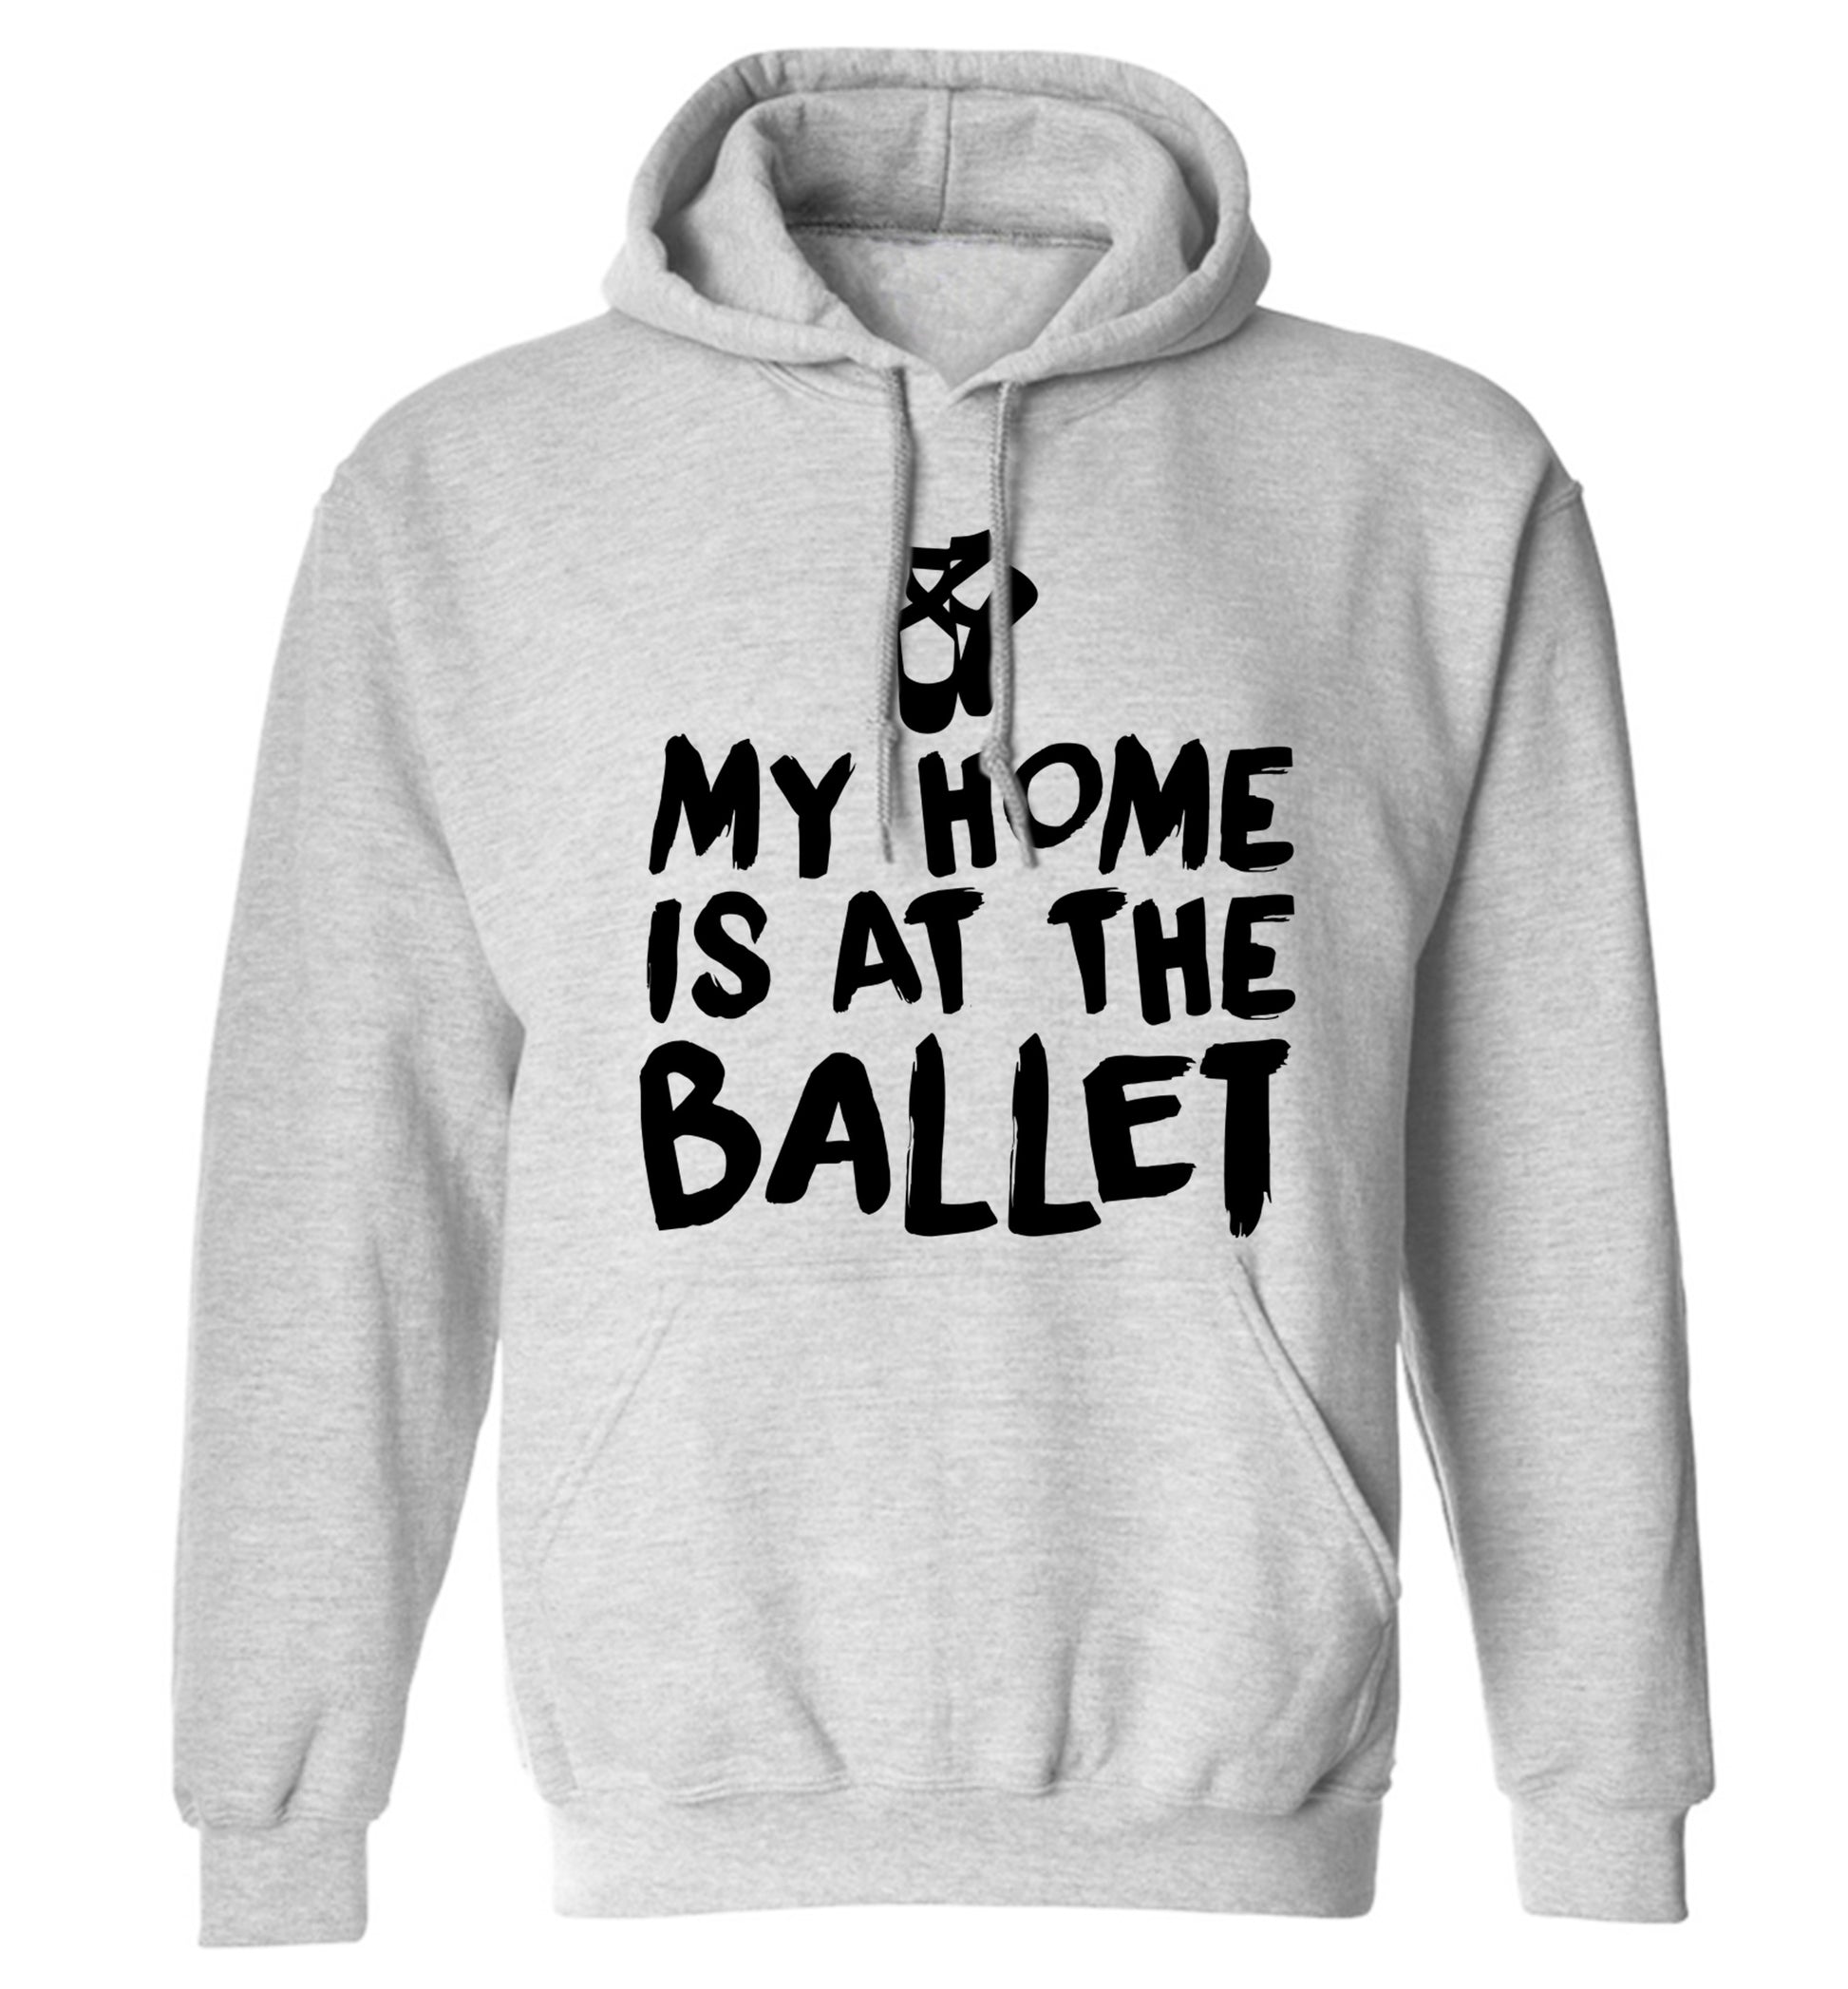 My home is at the ballet adults unisex grey hoodie 2XL